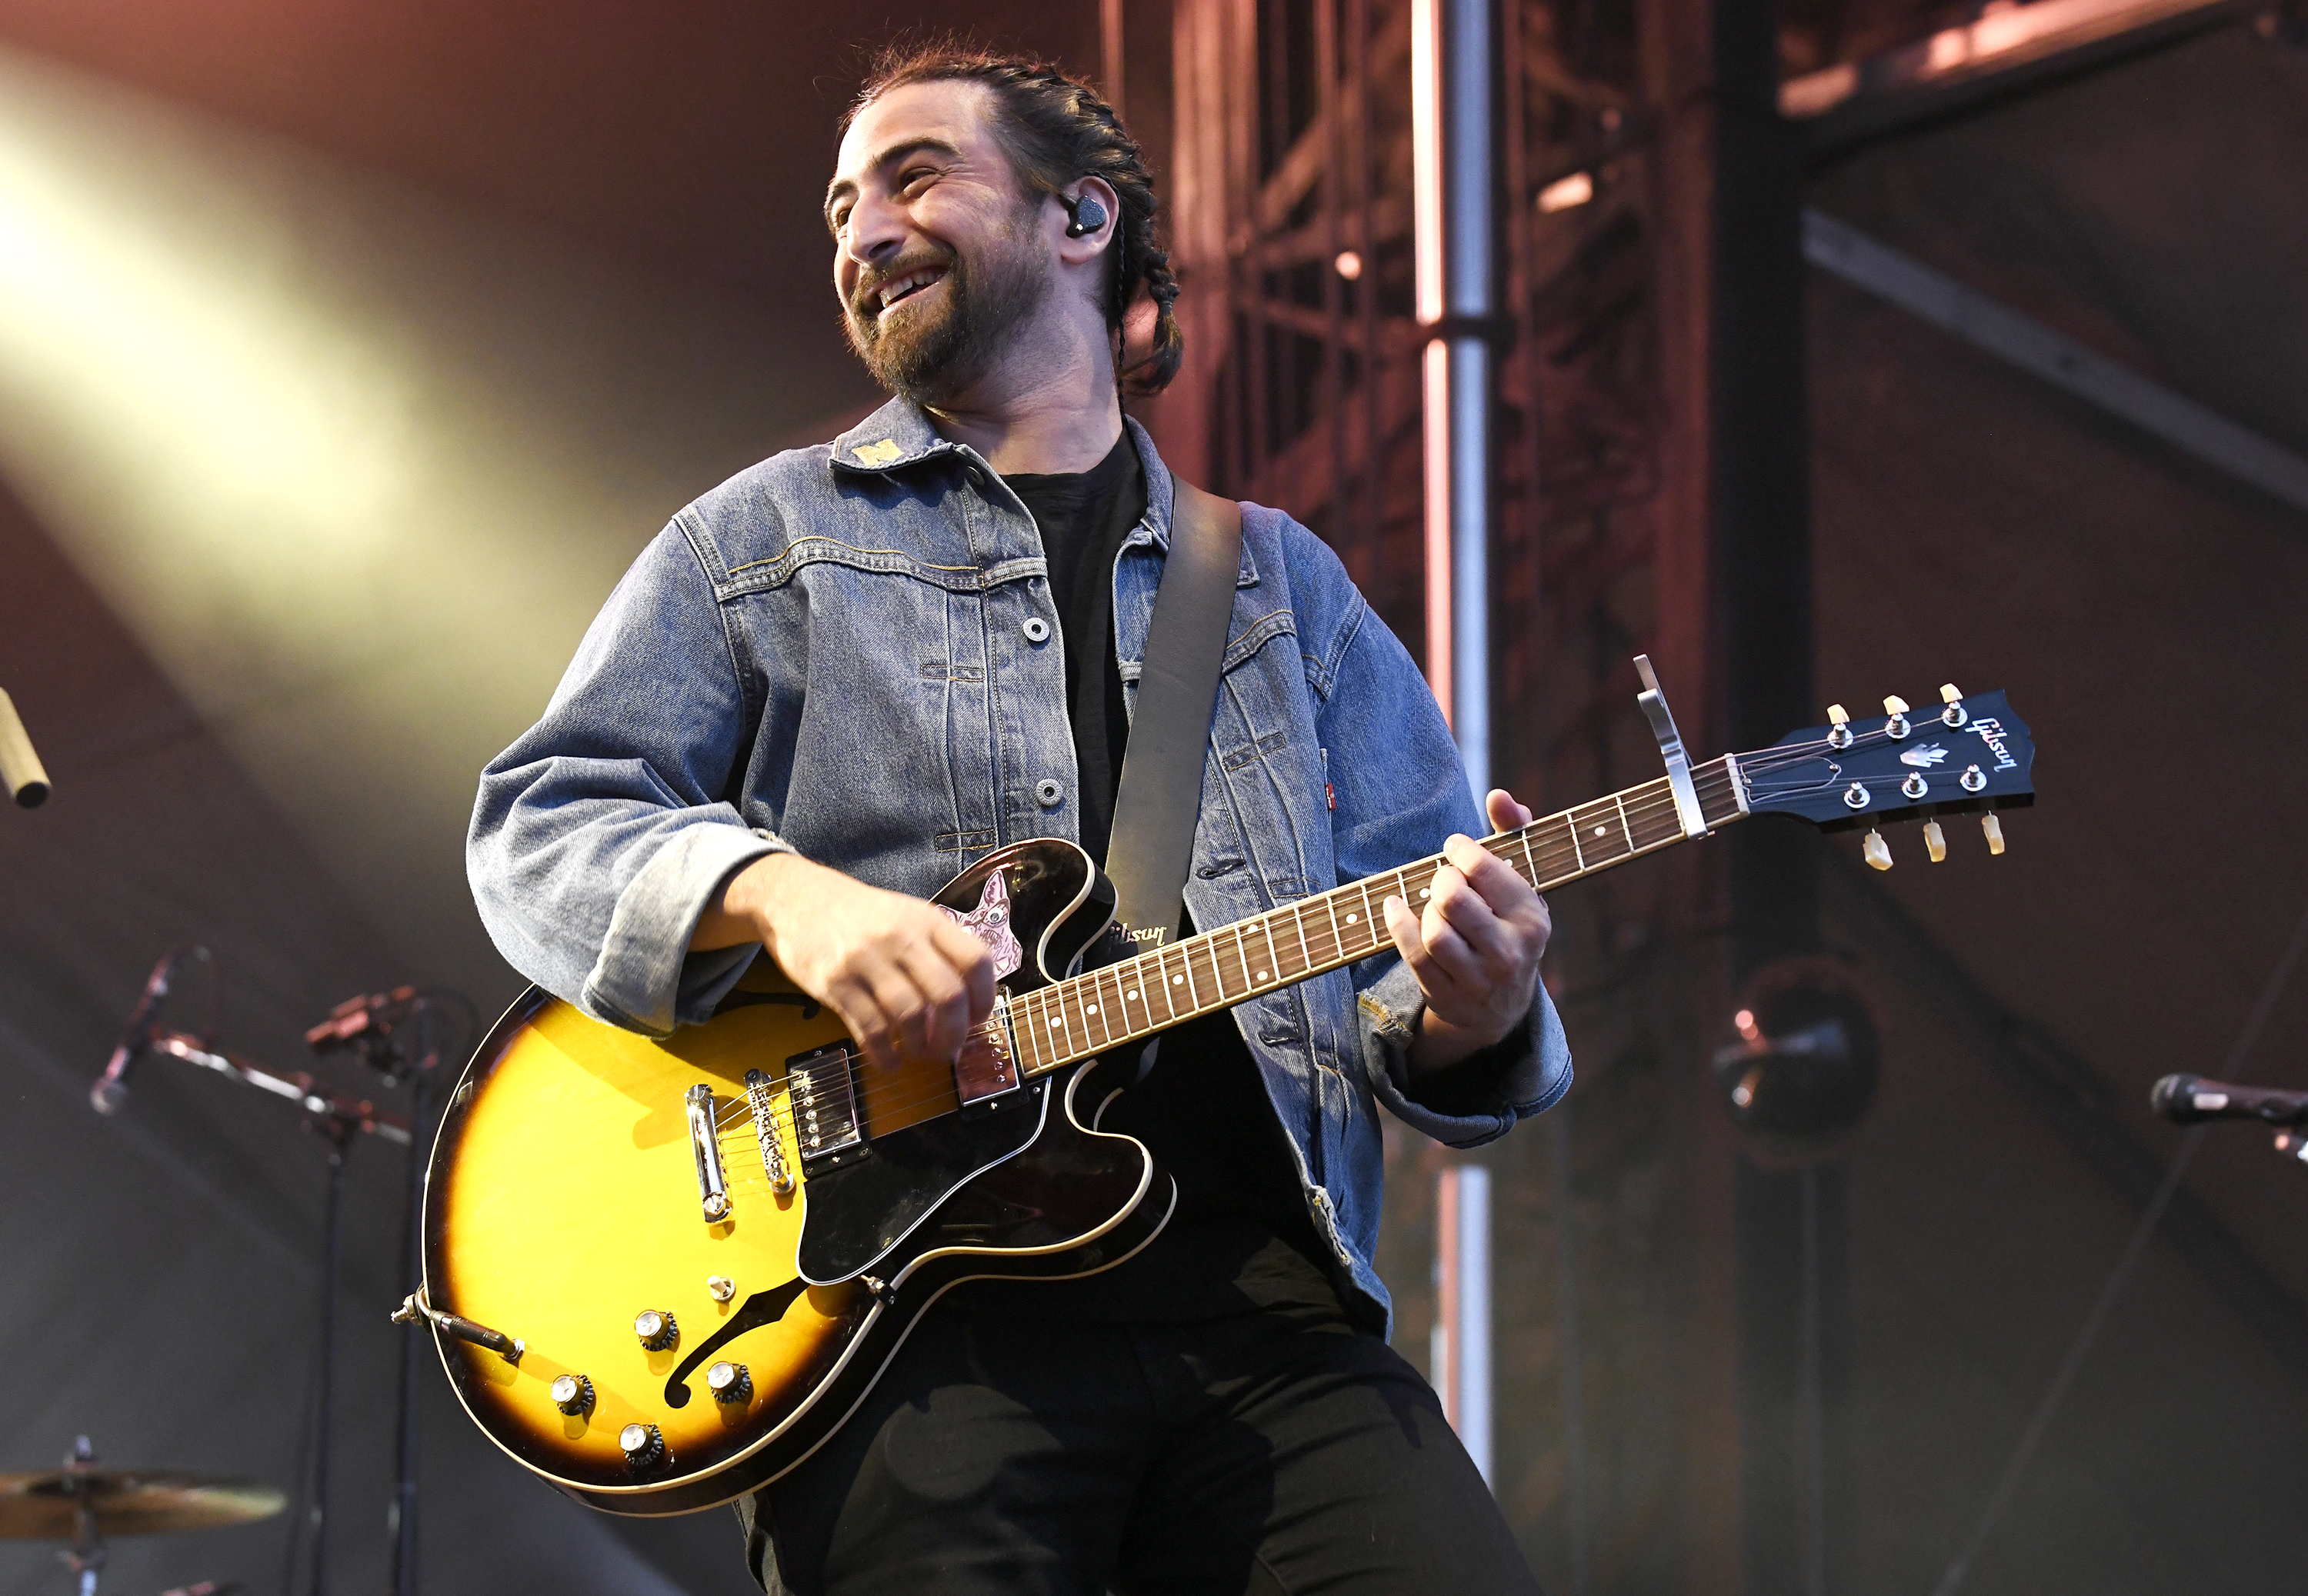 Kahan, a bearded man, with hair tied back in a braid, smiles while holding a guitar onstage.